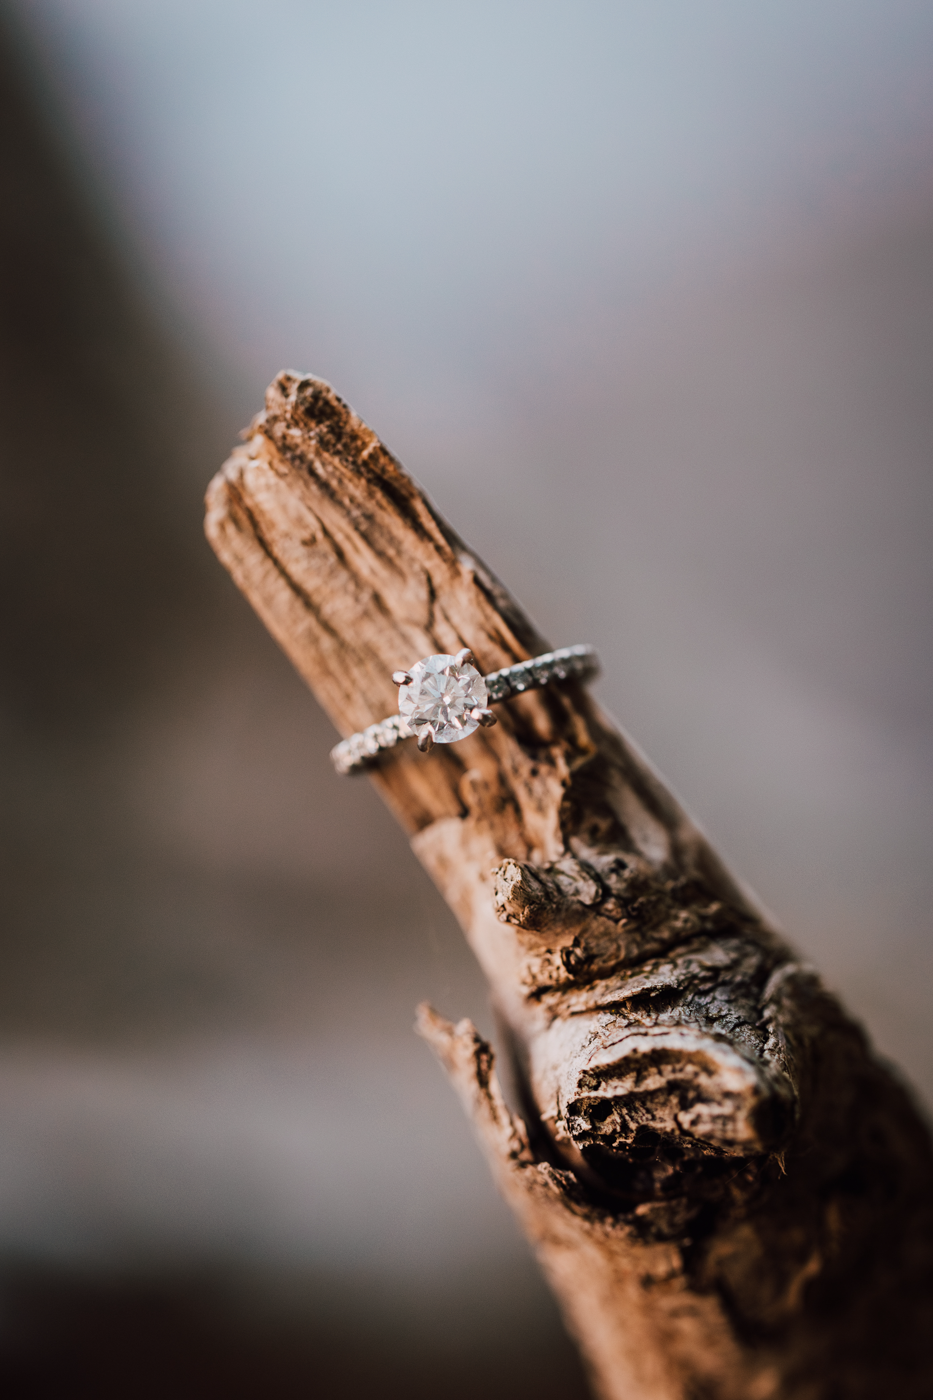  Close up of a solitaire engagement ring perched on some driftwood 